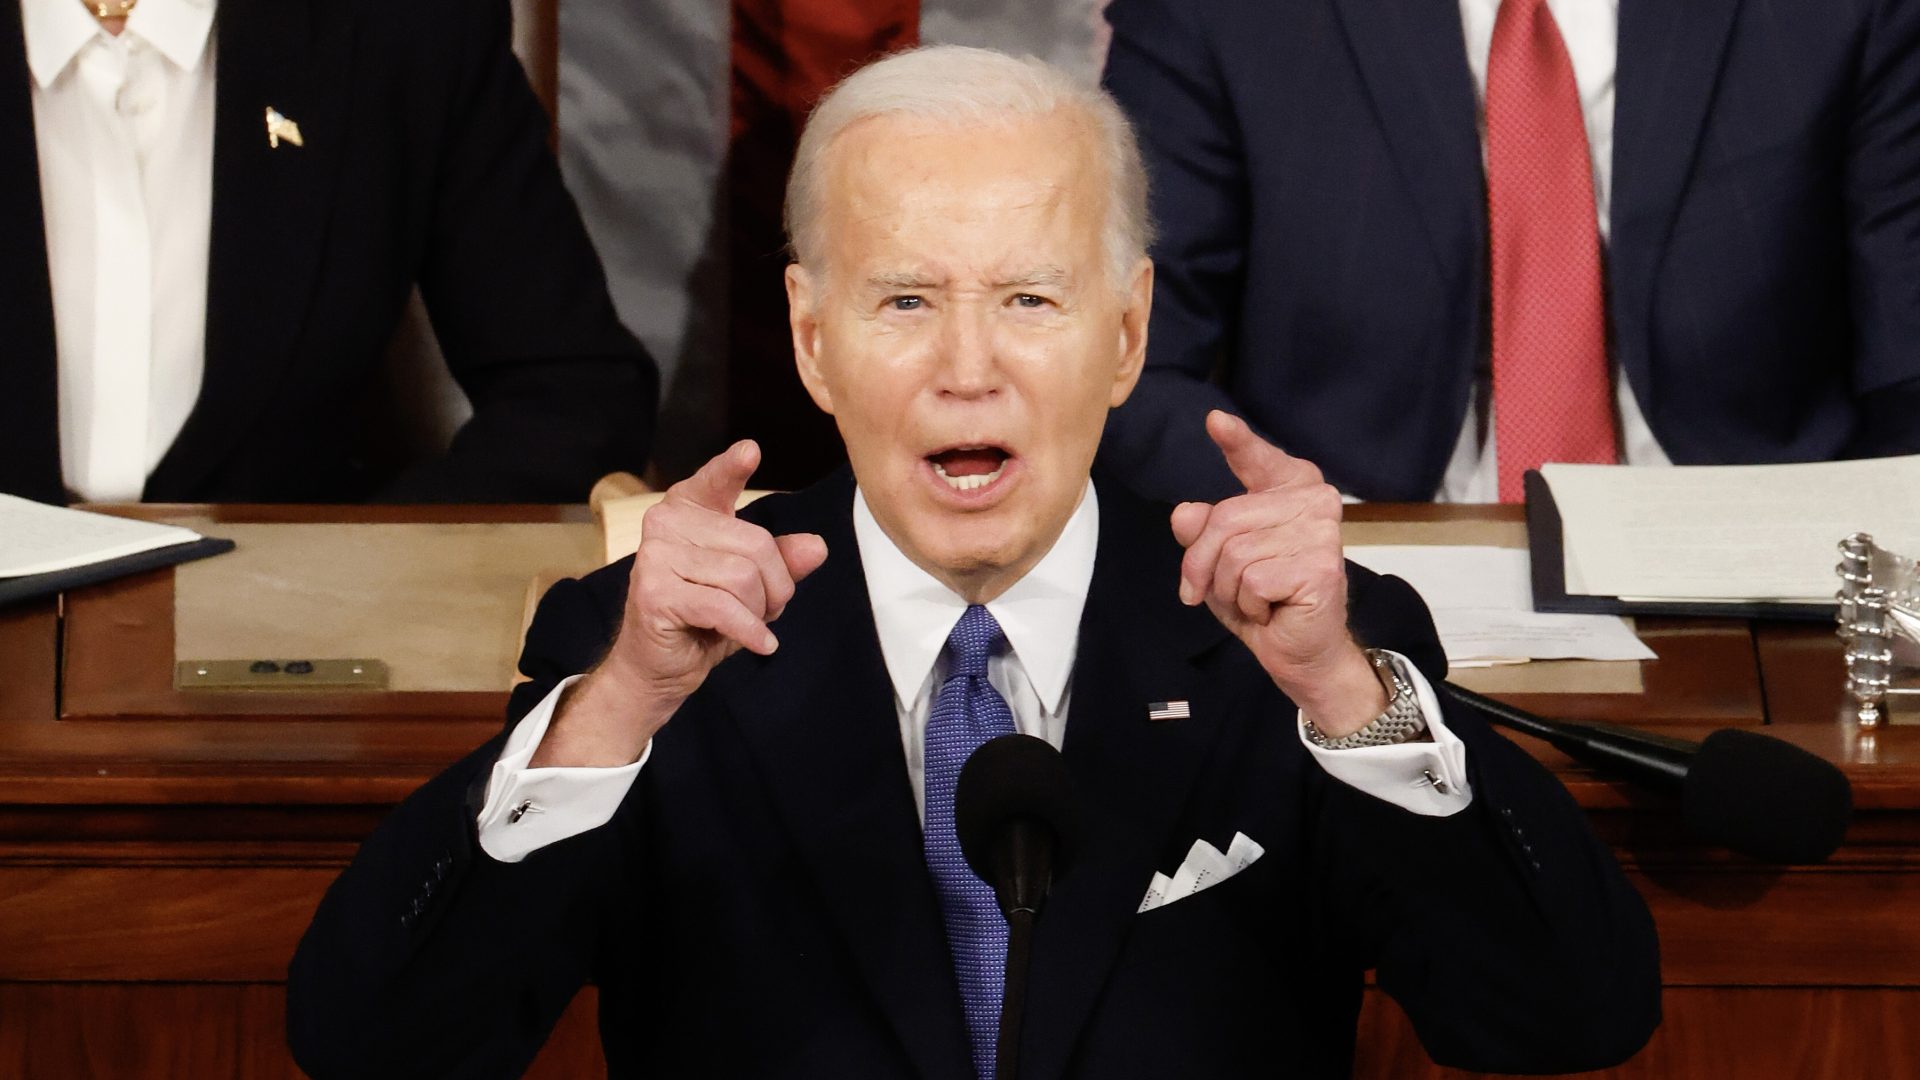 President Biden Discusses The Threat To Democracy, Roe v. Wade, And More During His State Of The Union Address (Videos) thumbnail